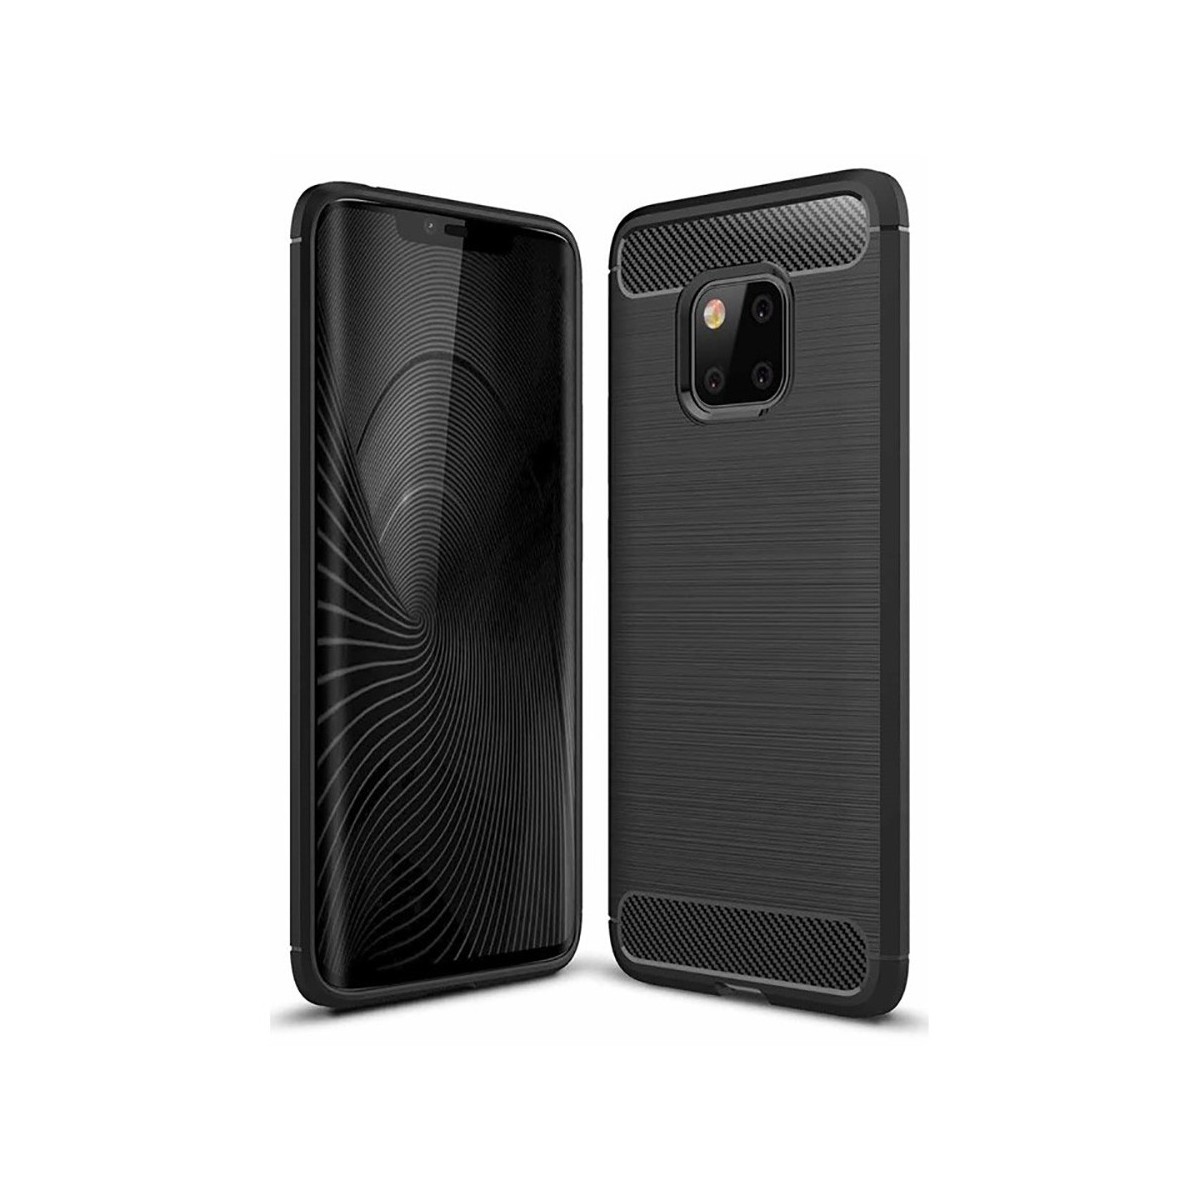 Coque Huawei Mate 20 Pro effet carbone - Crazy Kase